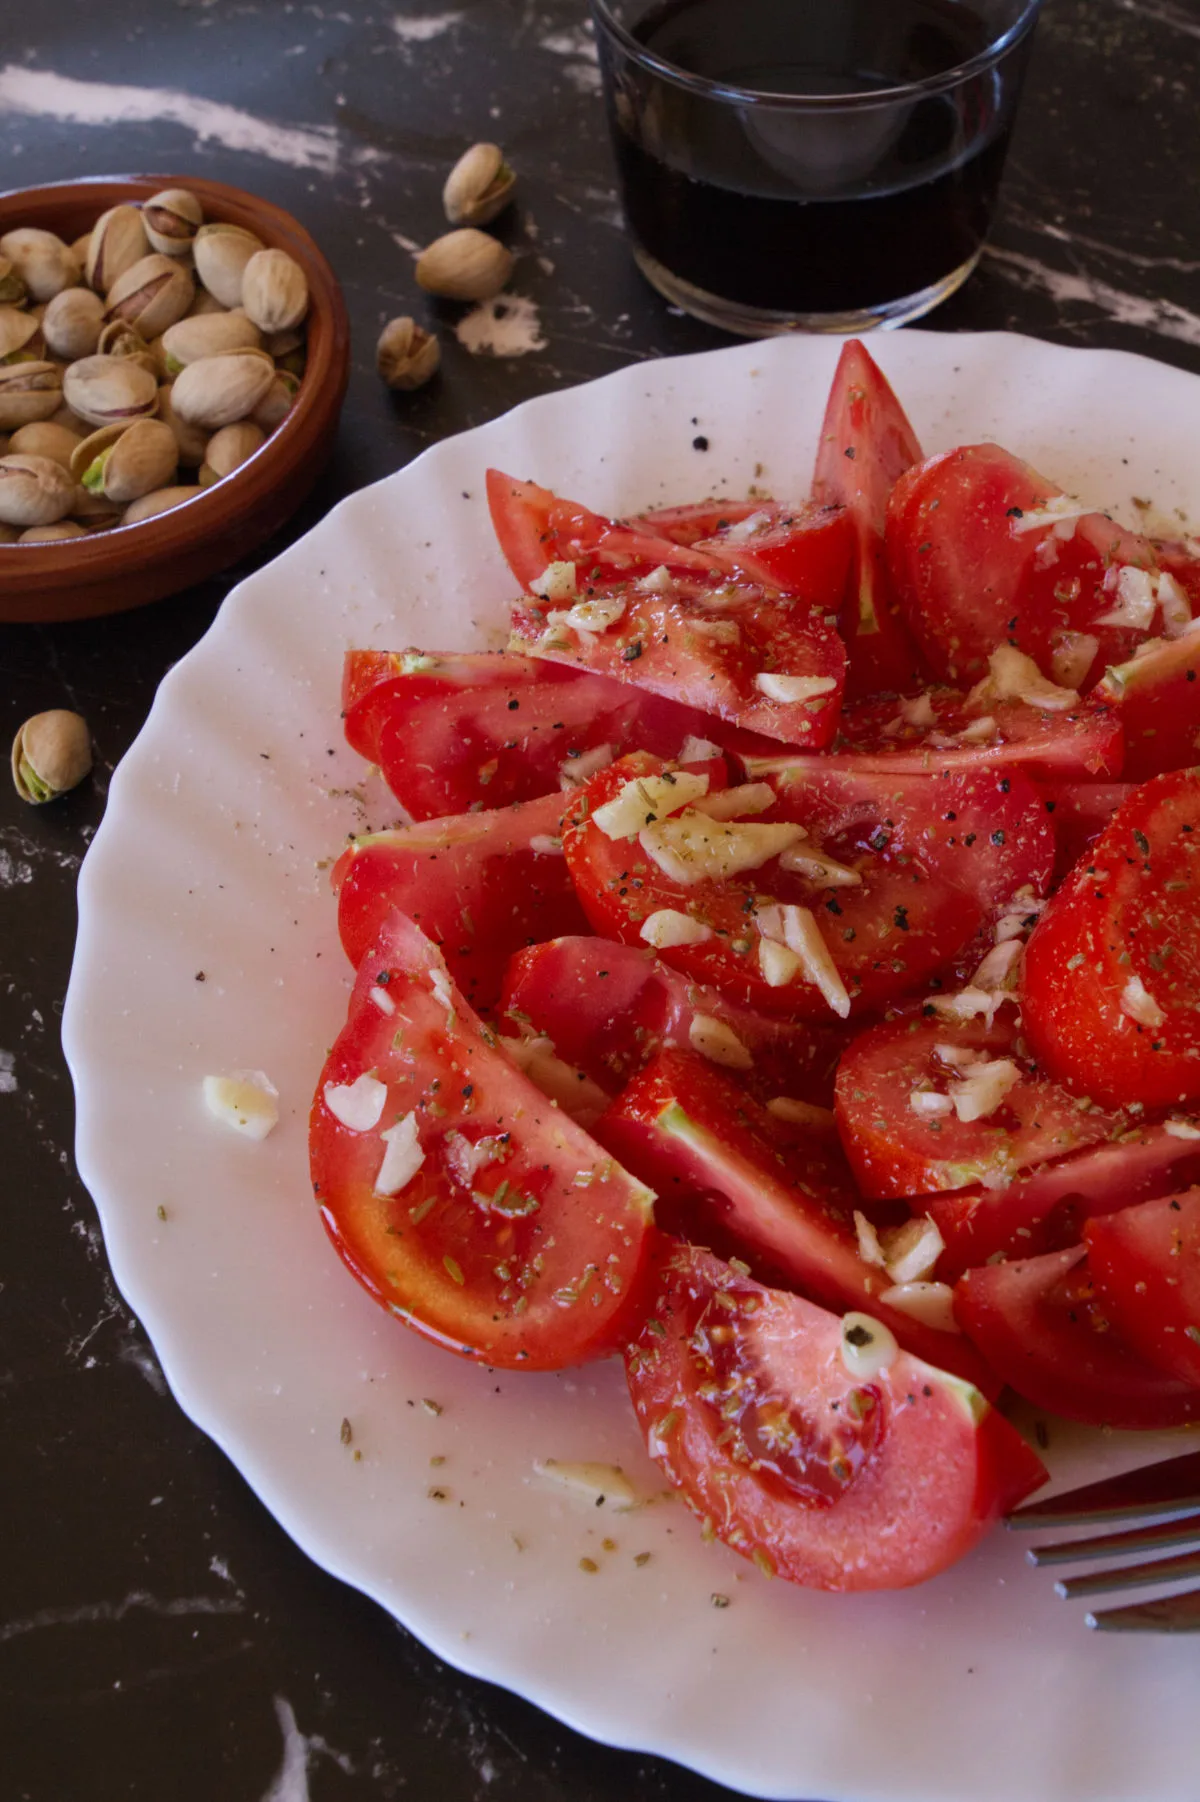 A plate of tomato salad sits beside some pistachio nuts and a glass of red wine.